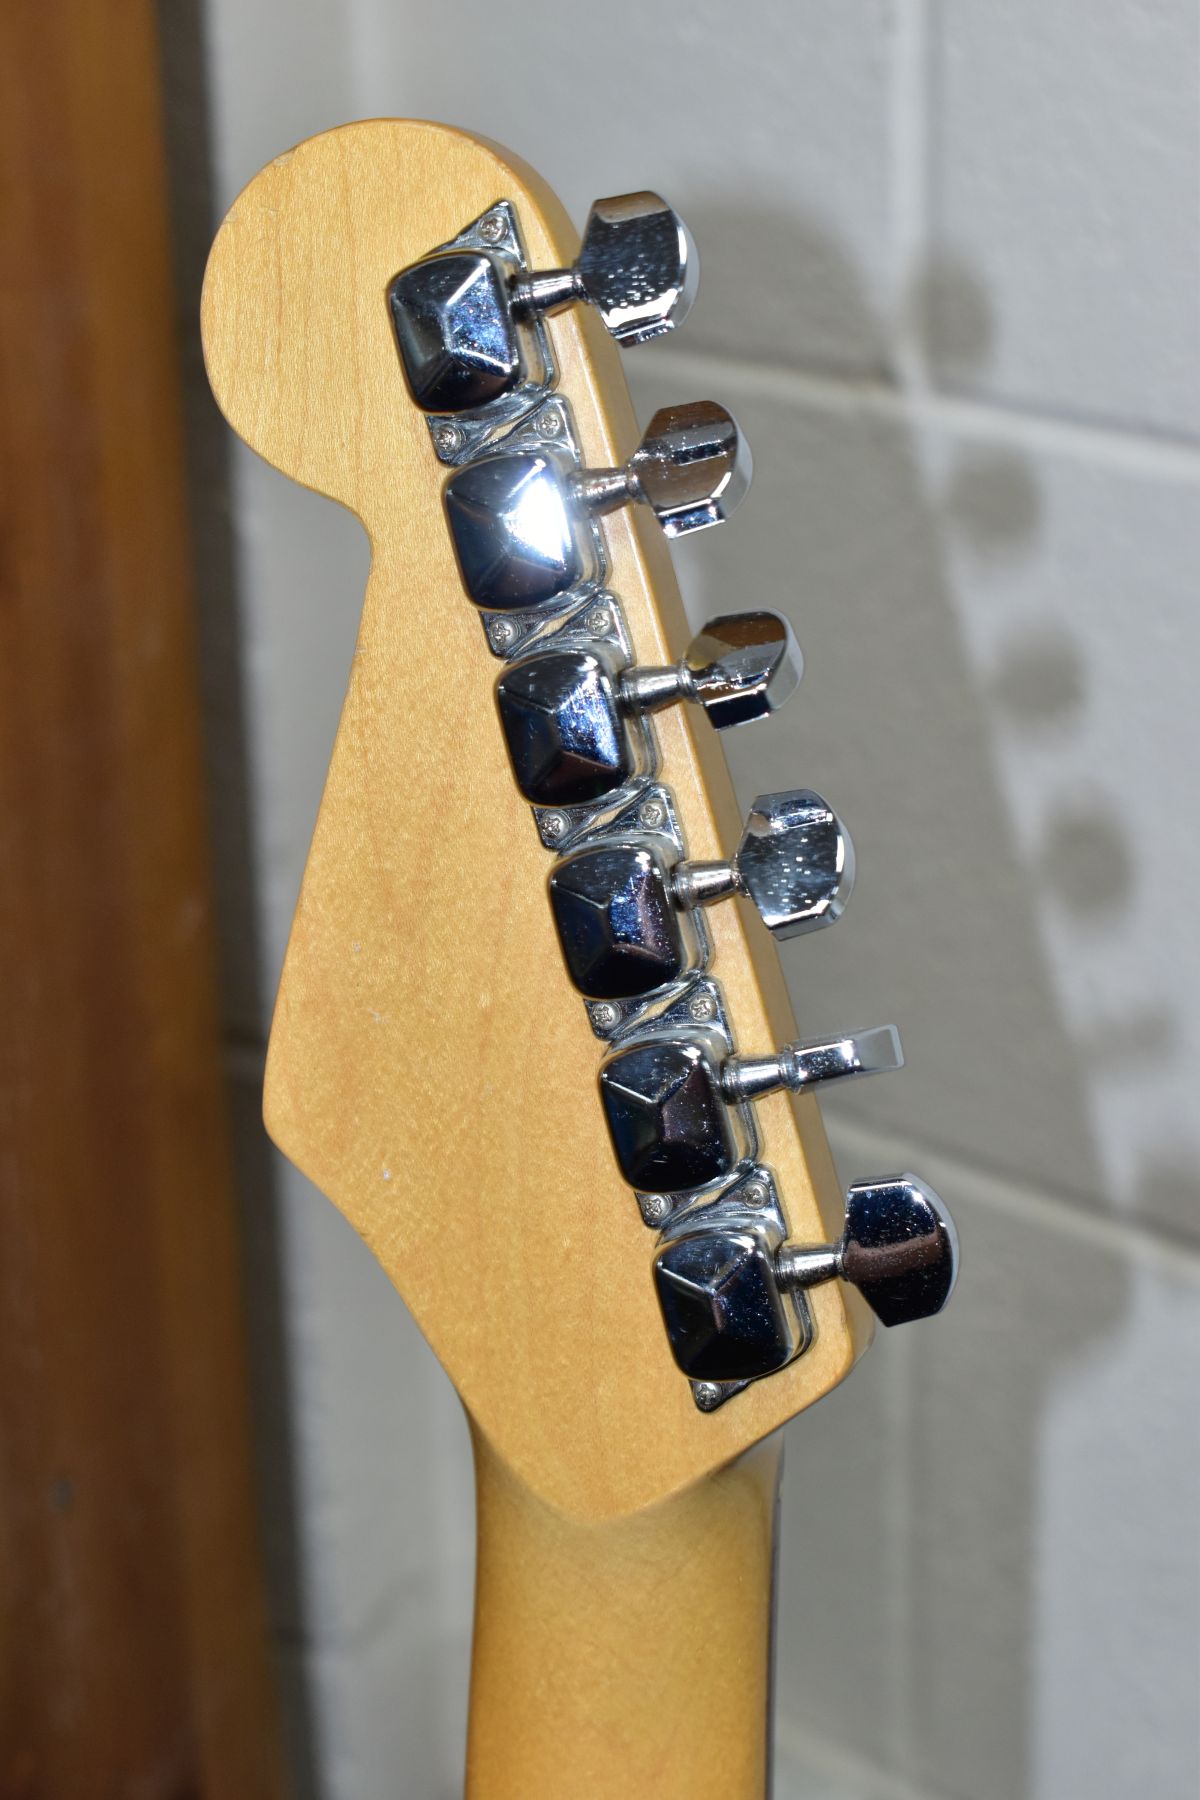 A SUNN MUSTANG ELECTRIC GUITAR, RED AND CREAM FINISH, serial number NC434622, made in China, - Image 5 of 8